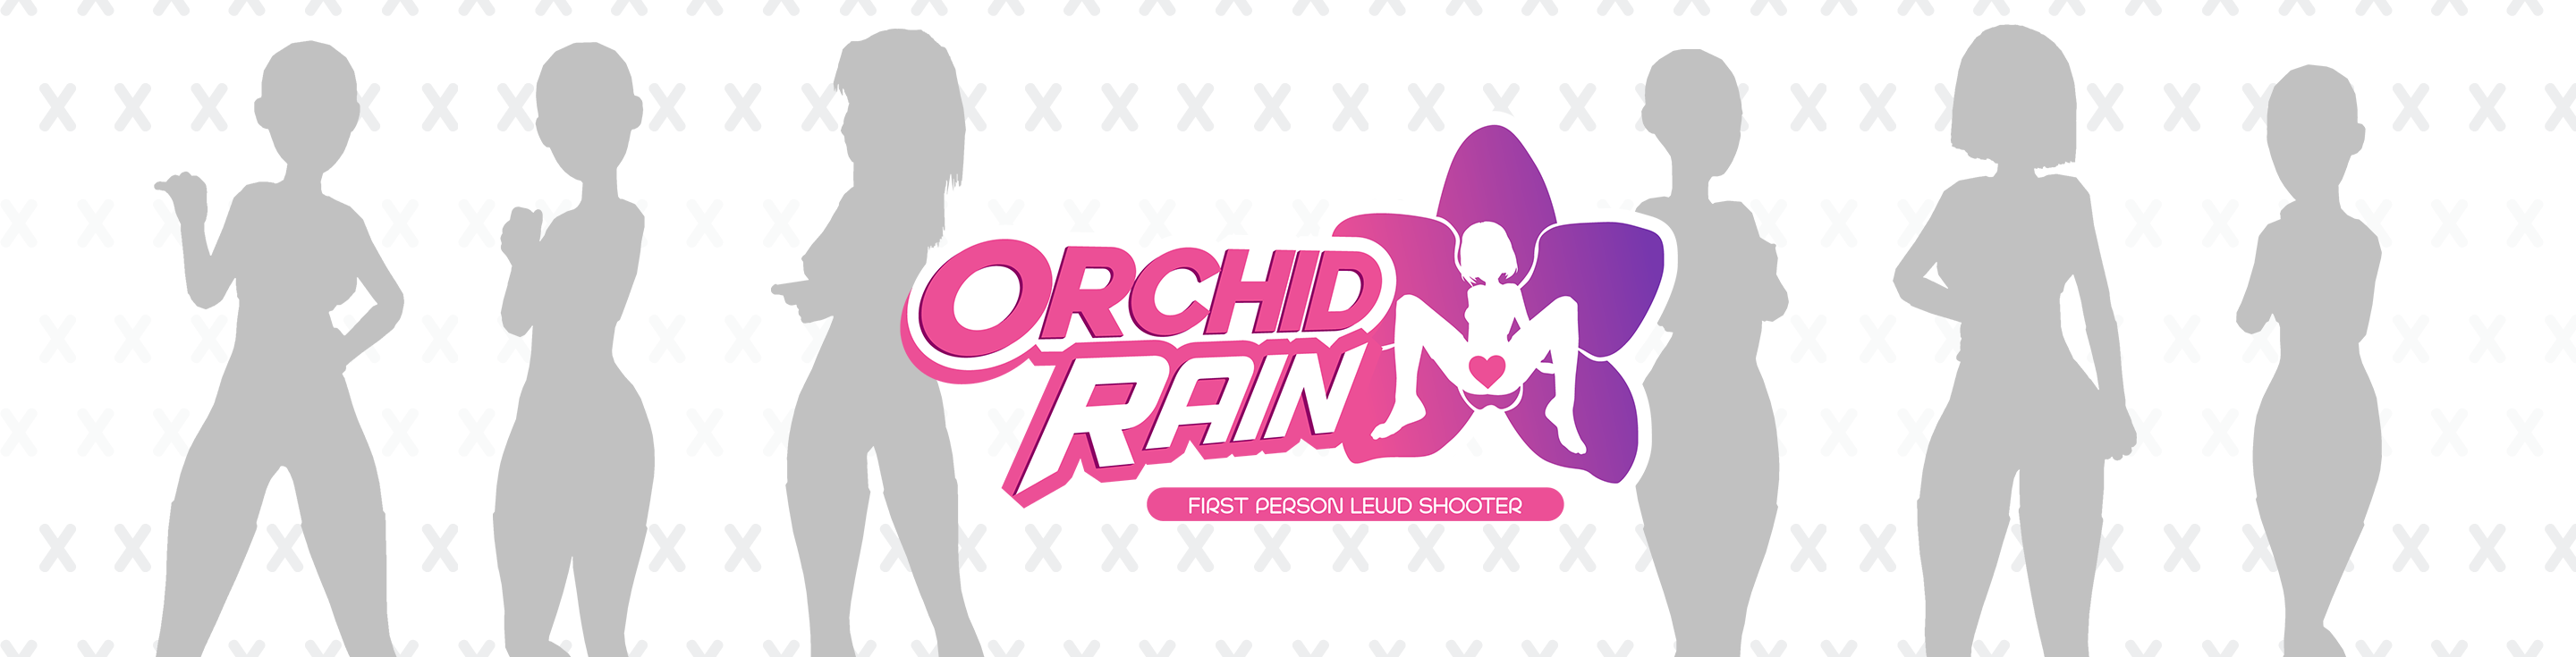 Orchid Rain - Mission 08 build (outdated)